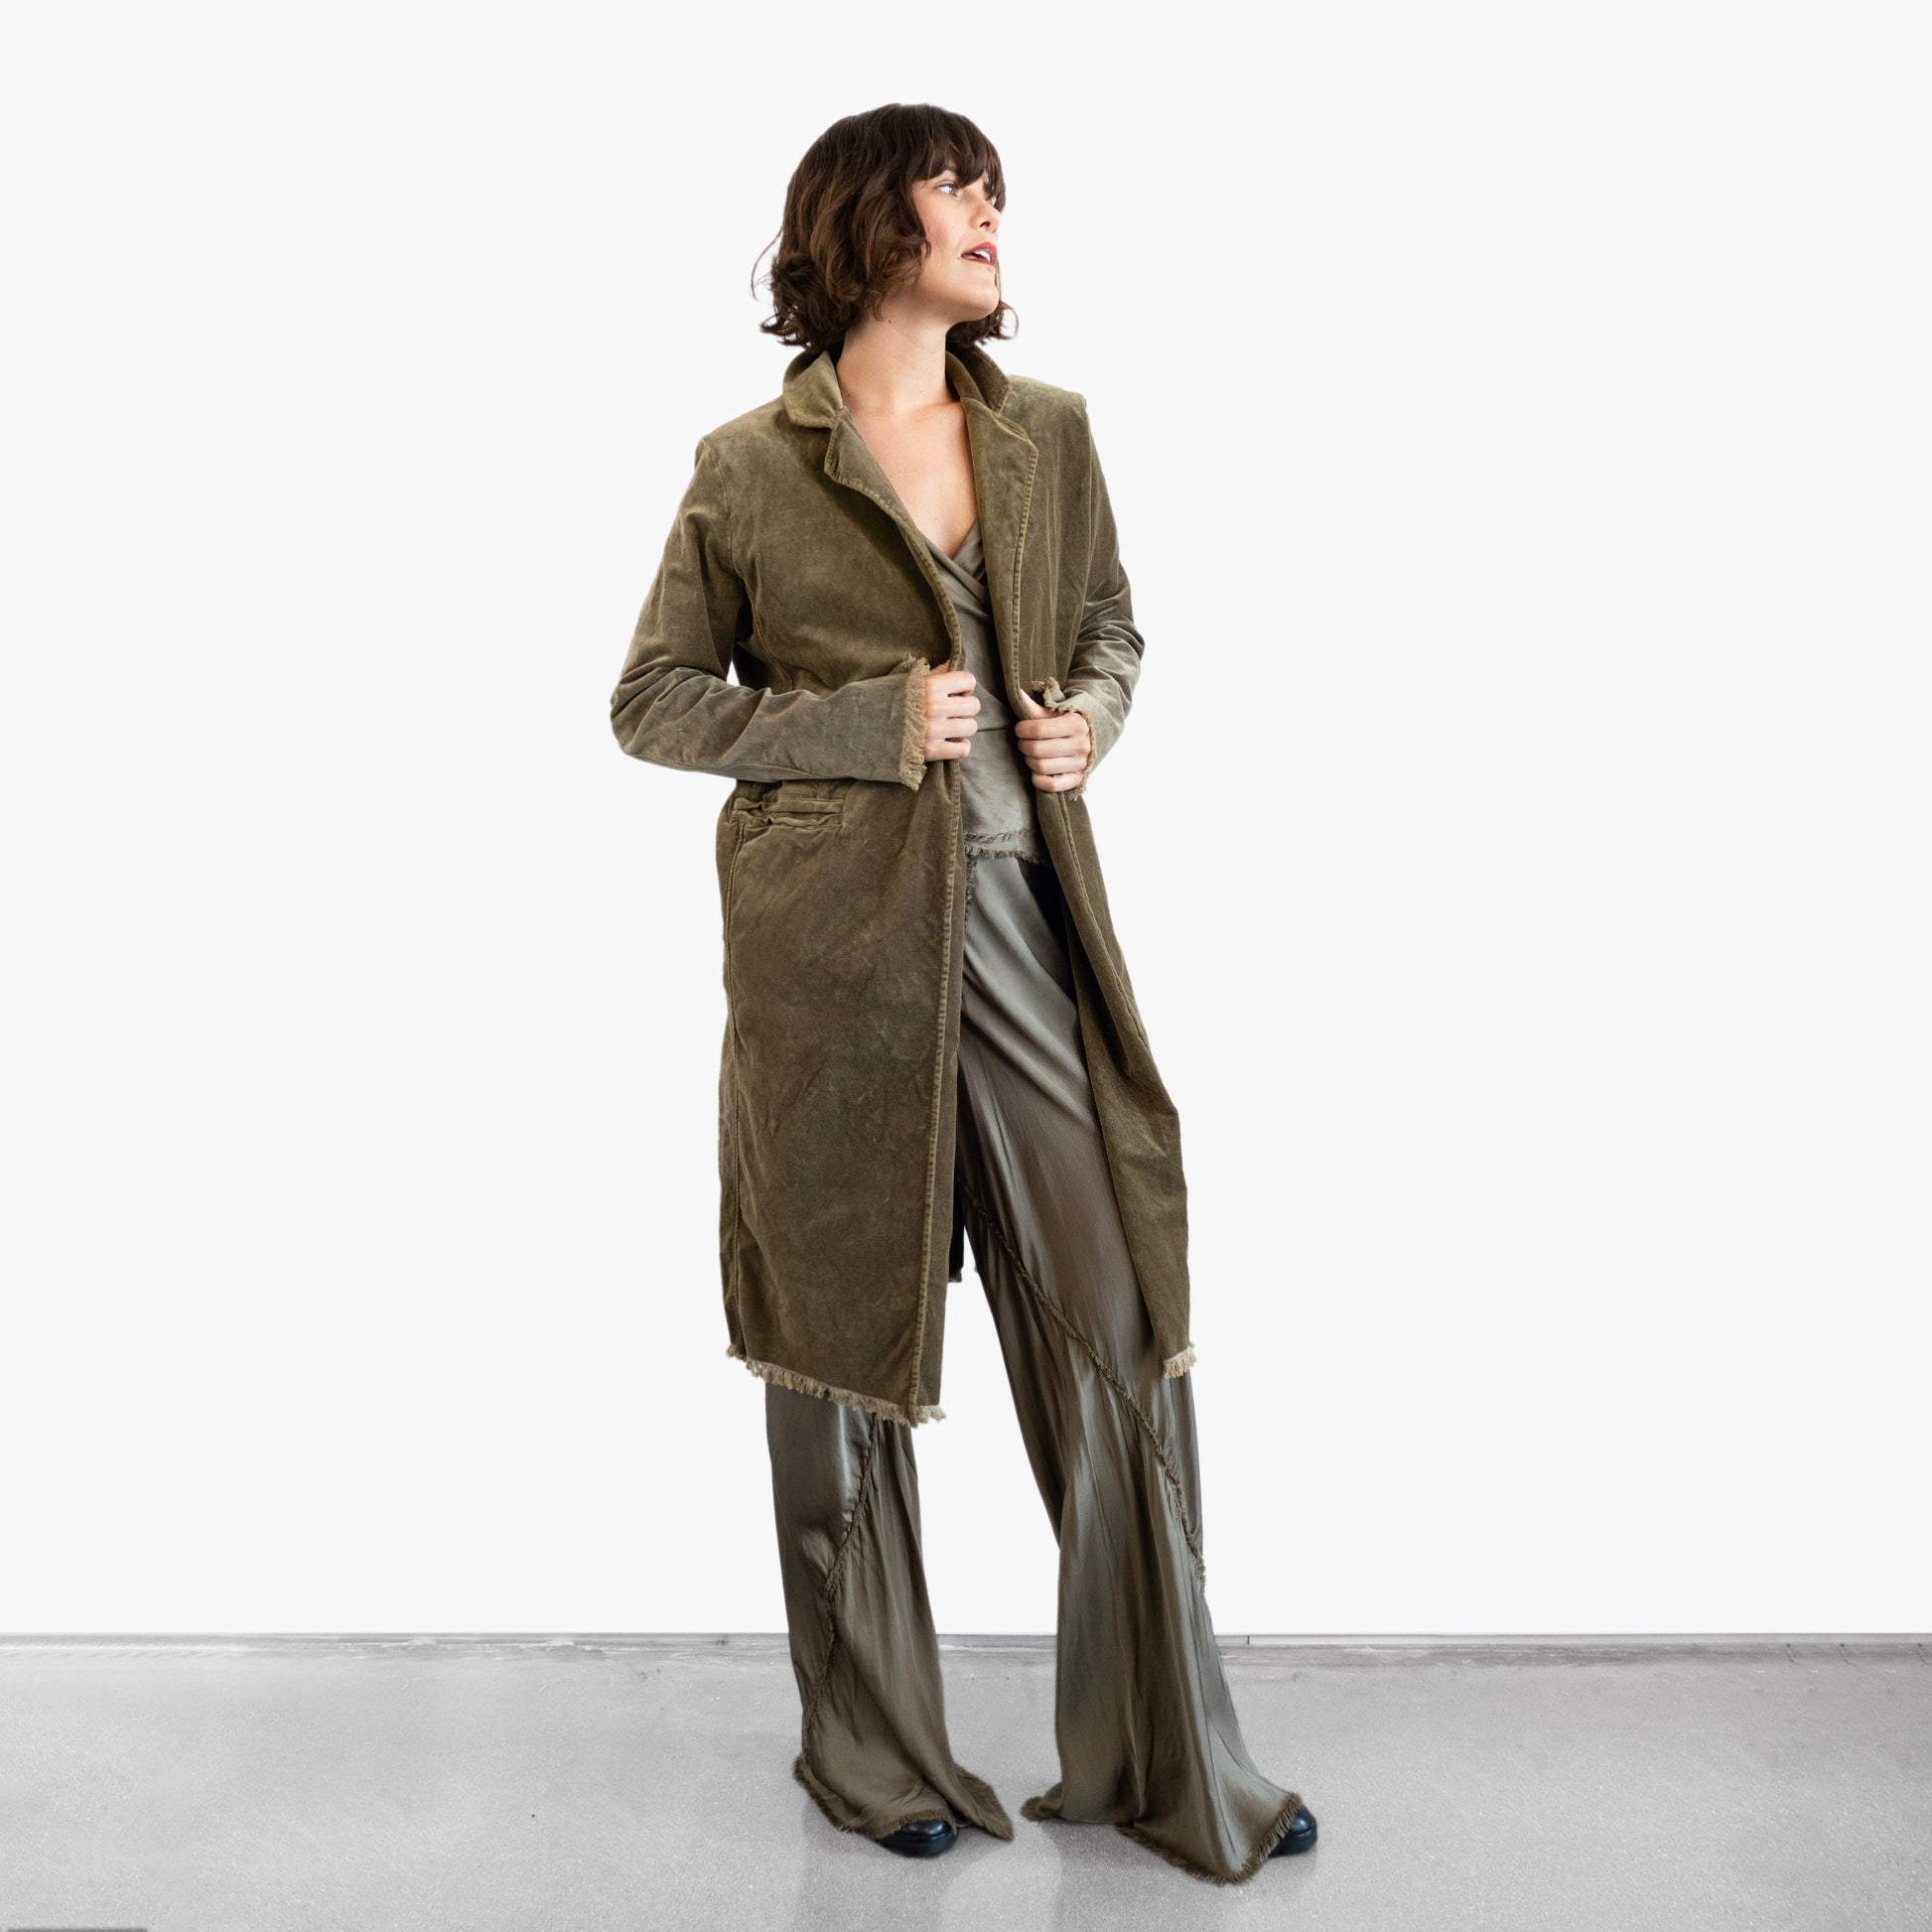 Model wearing a green velvet coat over a silk wrap top and silk pants